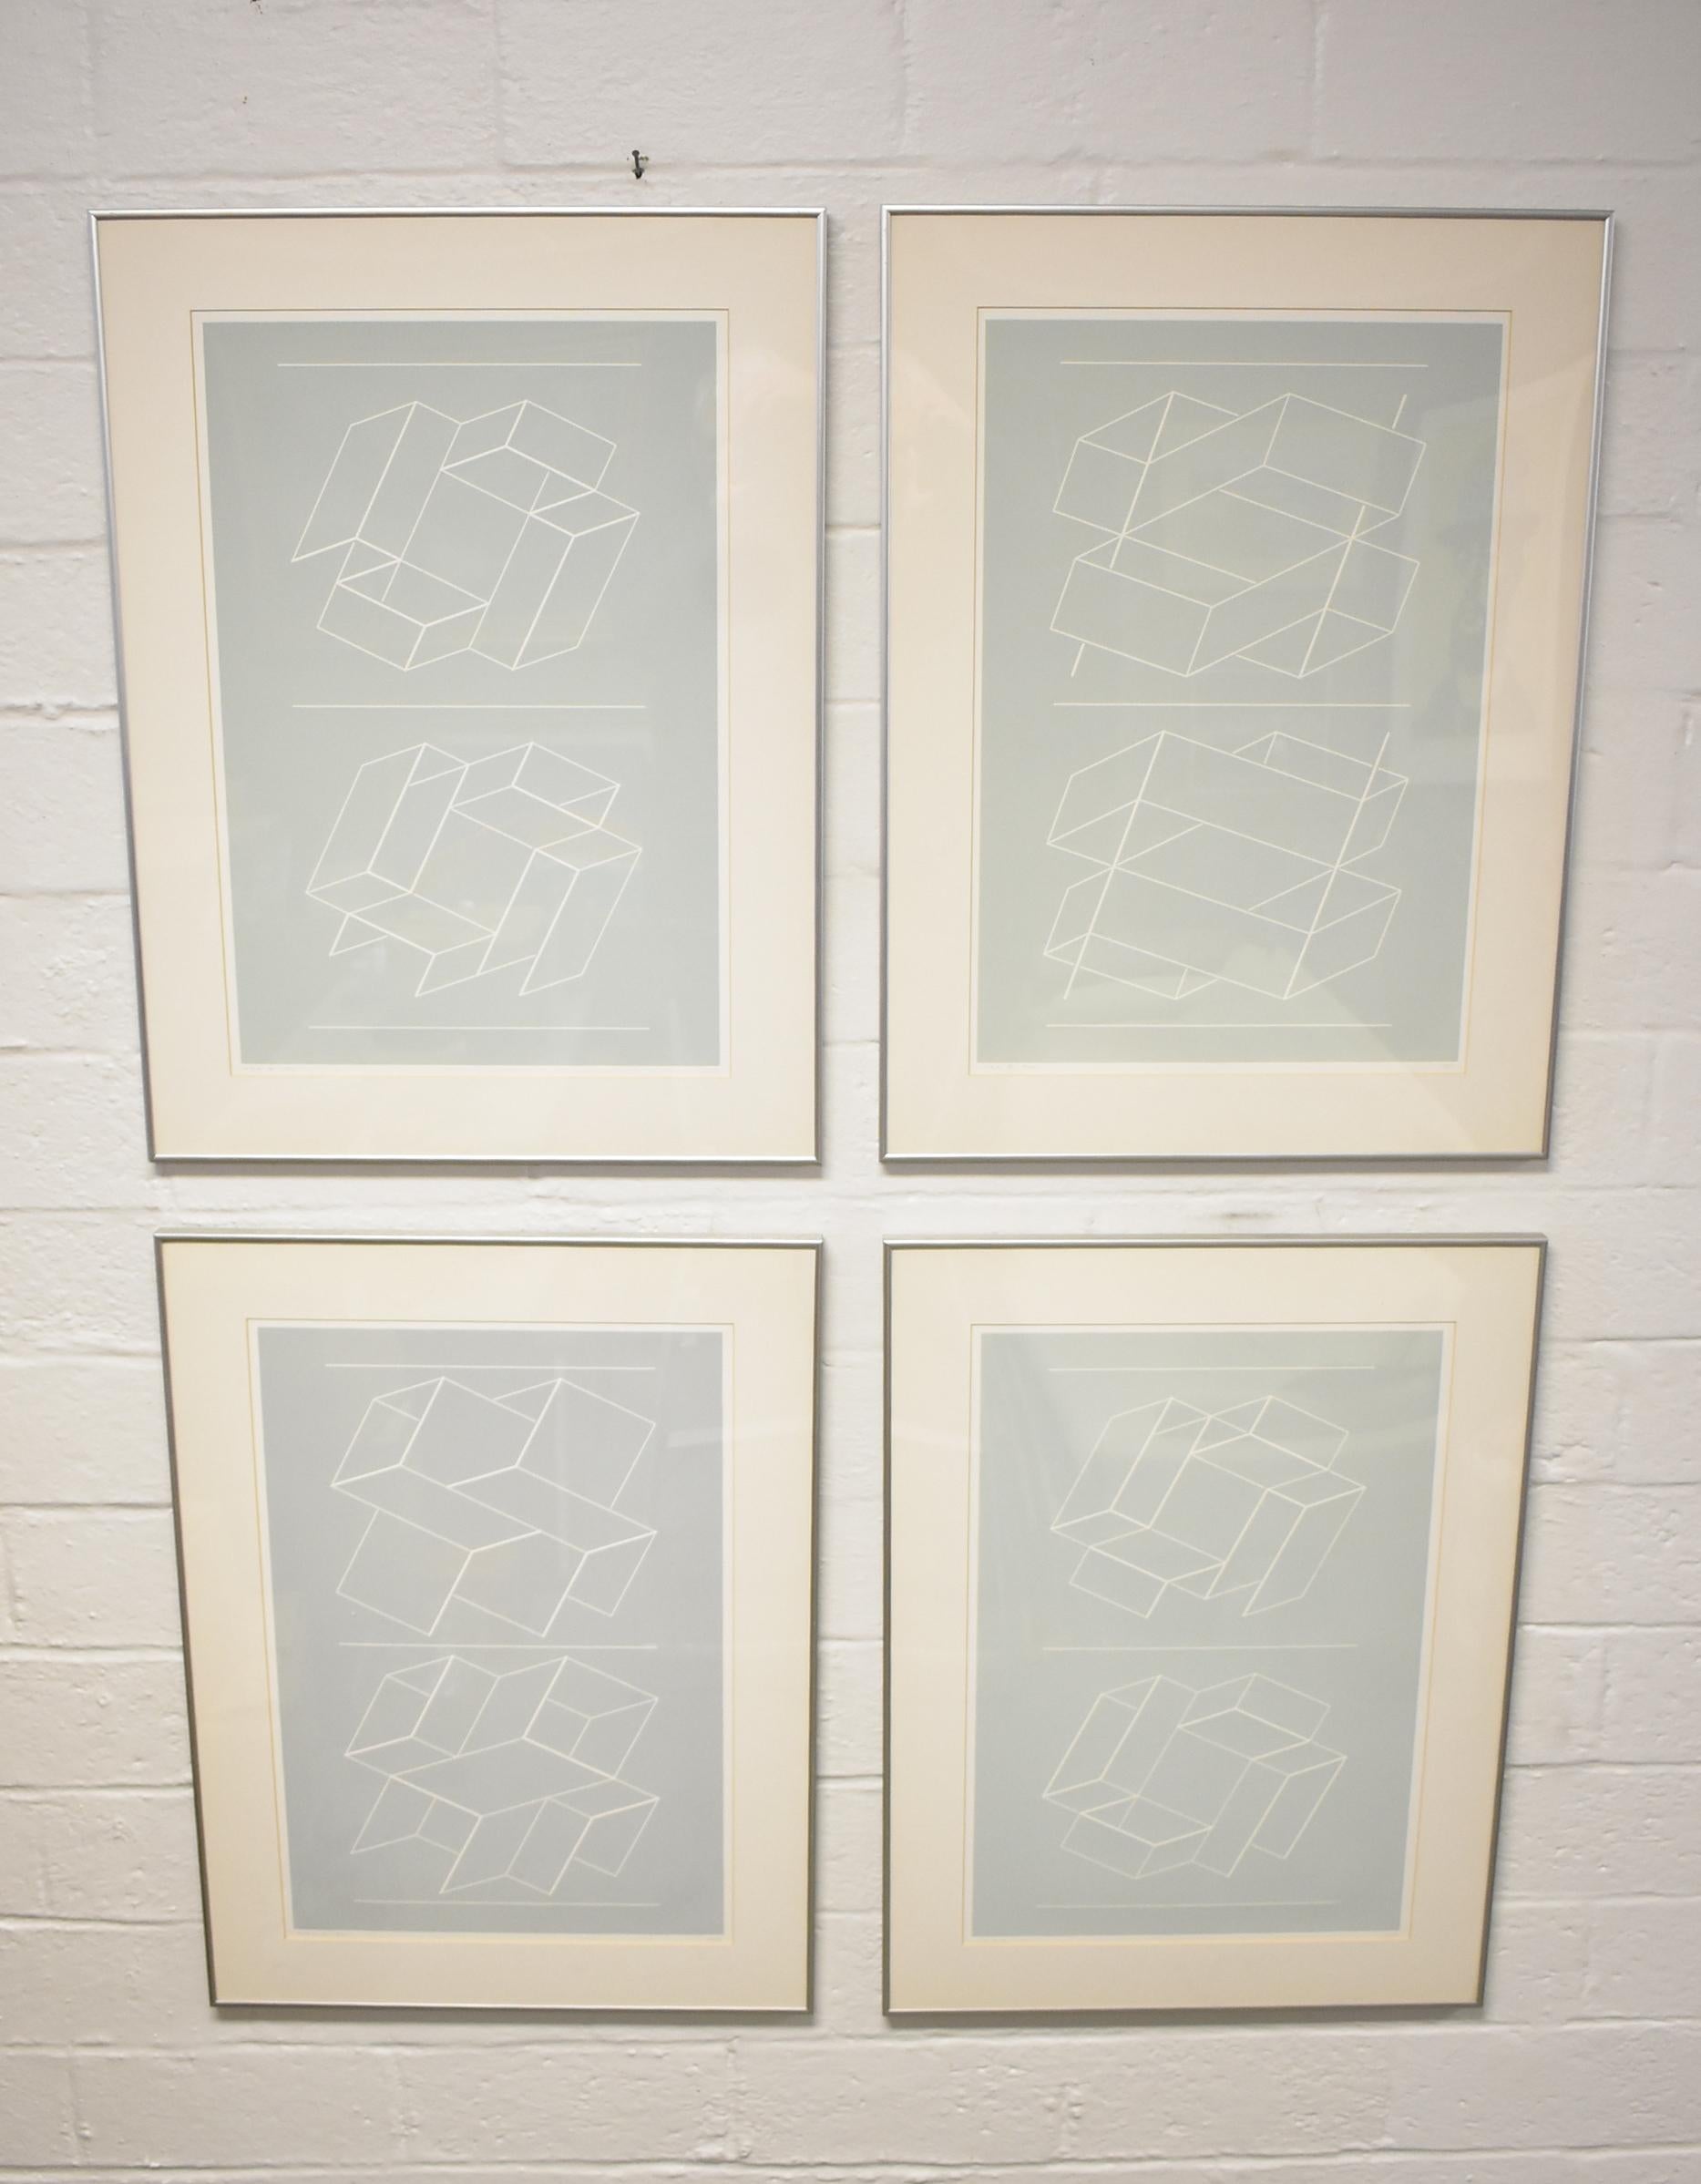 These four prints are from the 